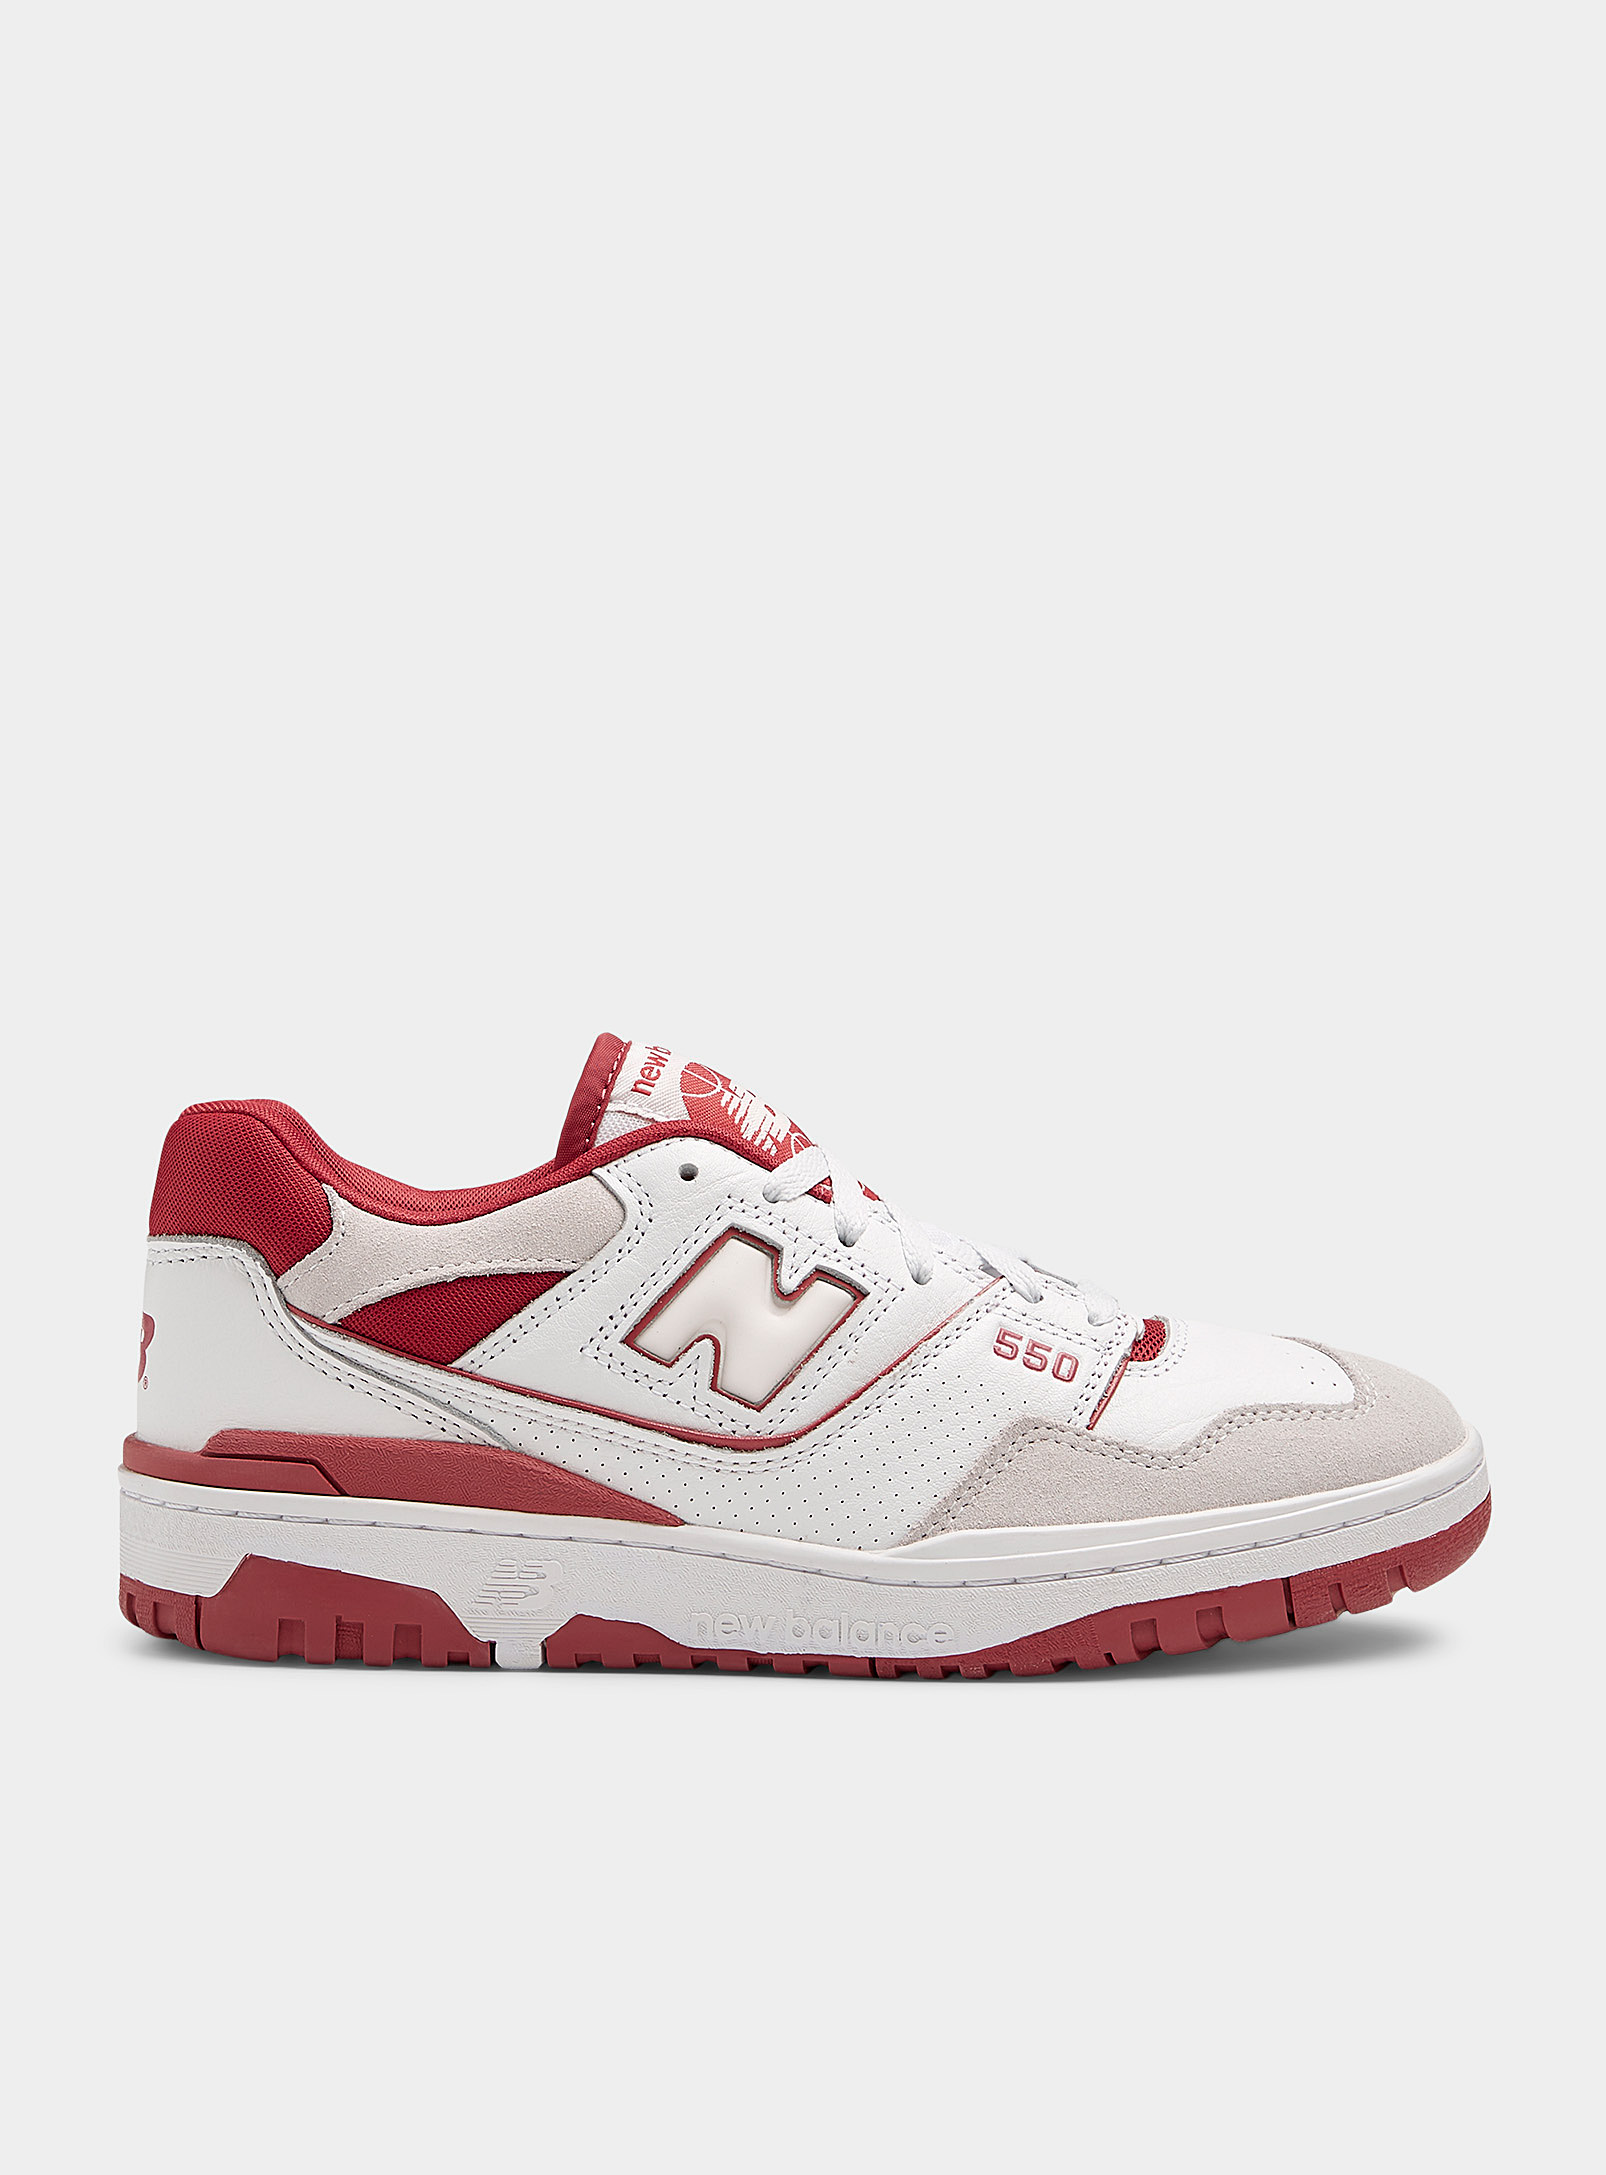 NEW BALANCE COLOURFUL DETAIL SNEAKERS MEN